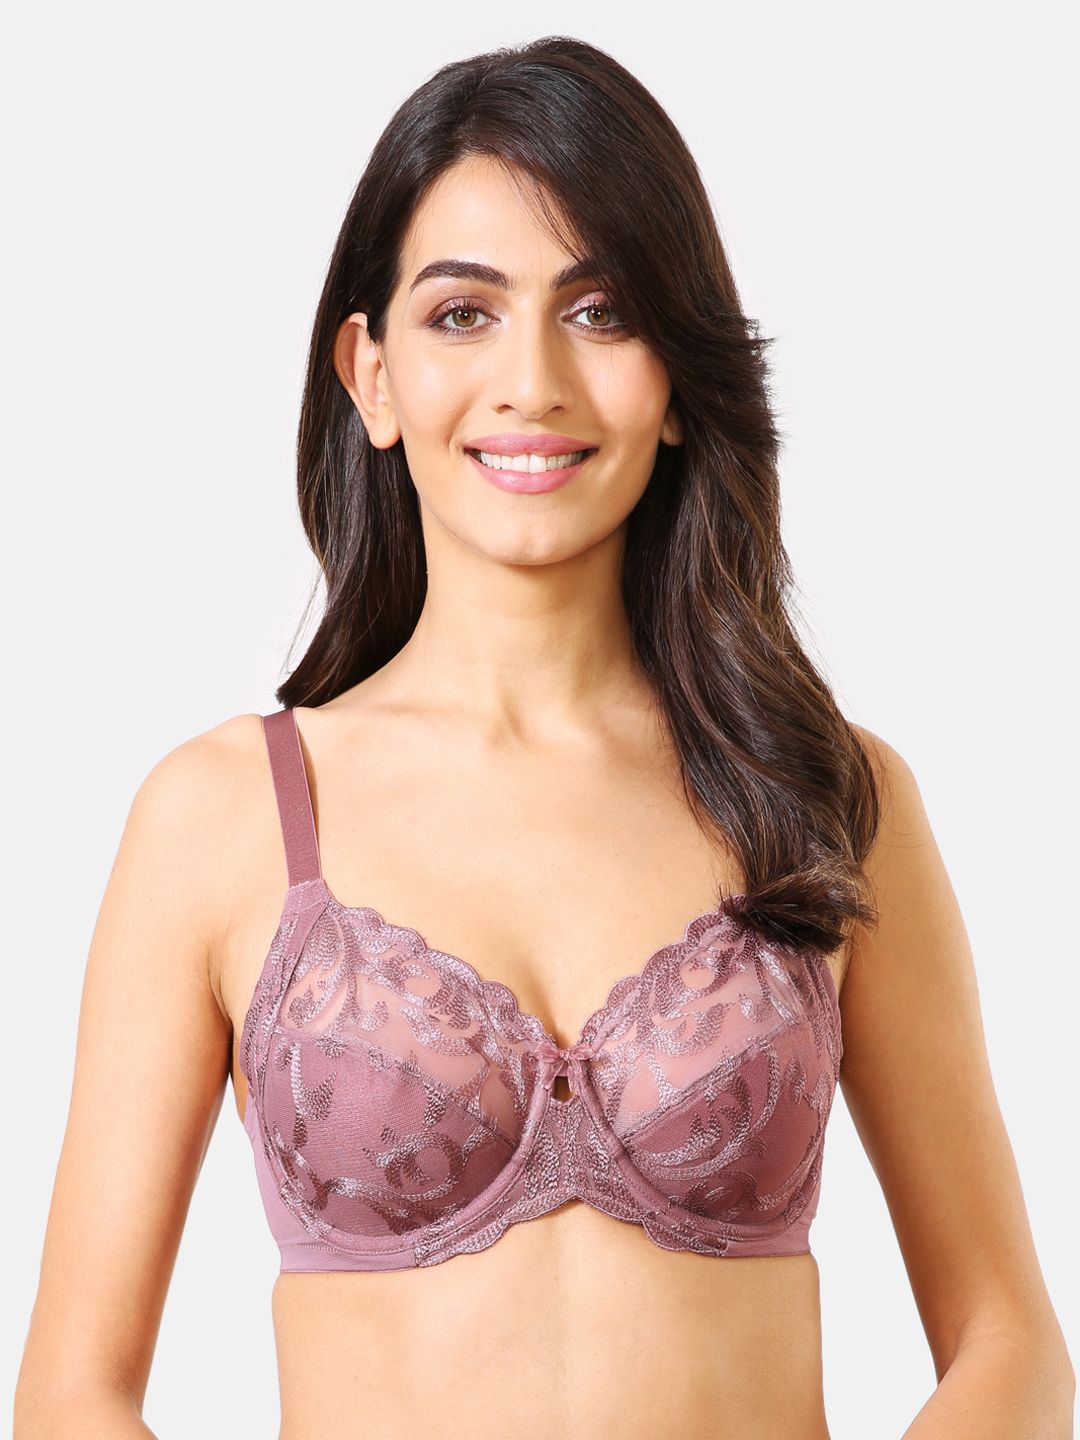 Van Heusen Mauve Lace Underwired Non Padded Wired Fashion Everyday Bra ILIBRAGASWW4433004 Price in India